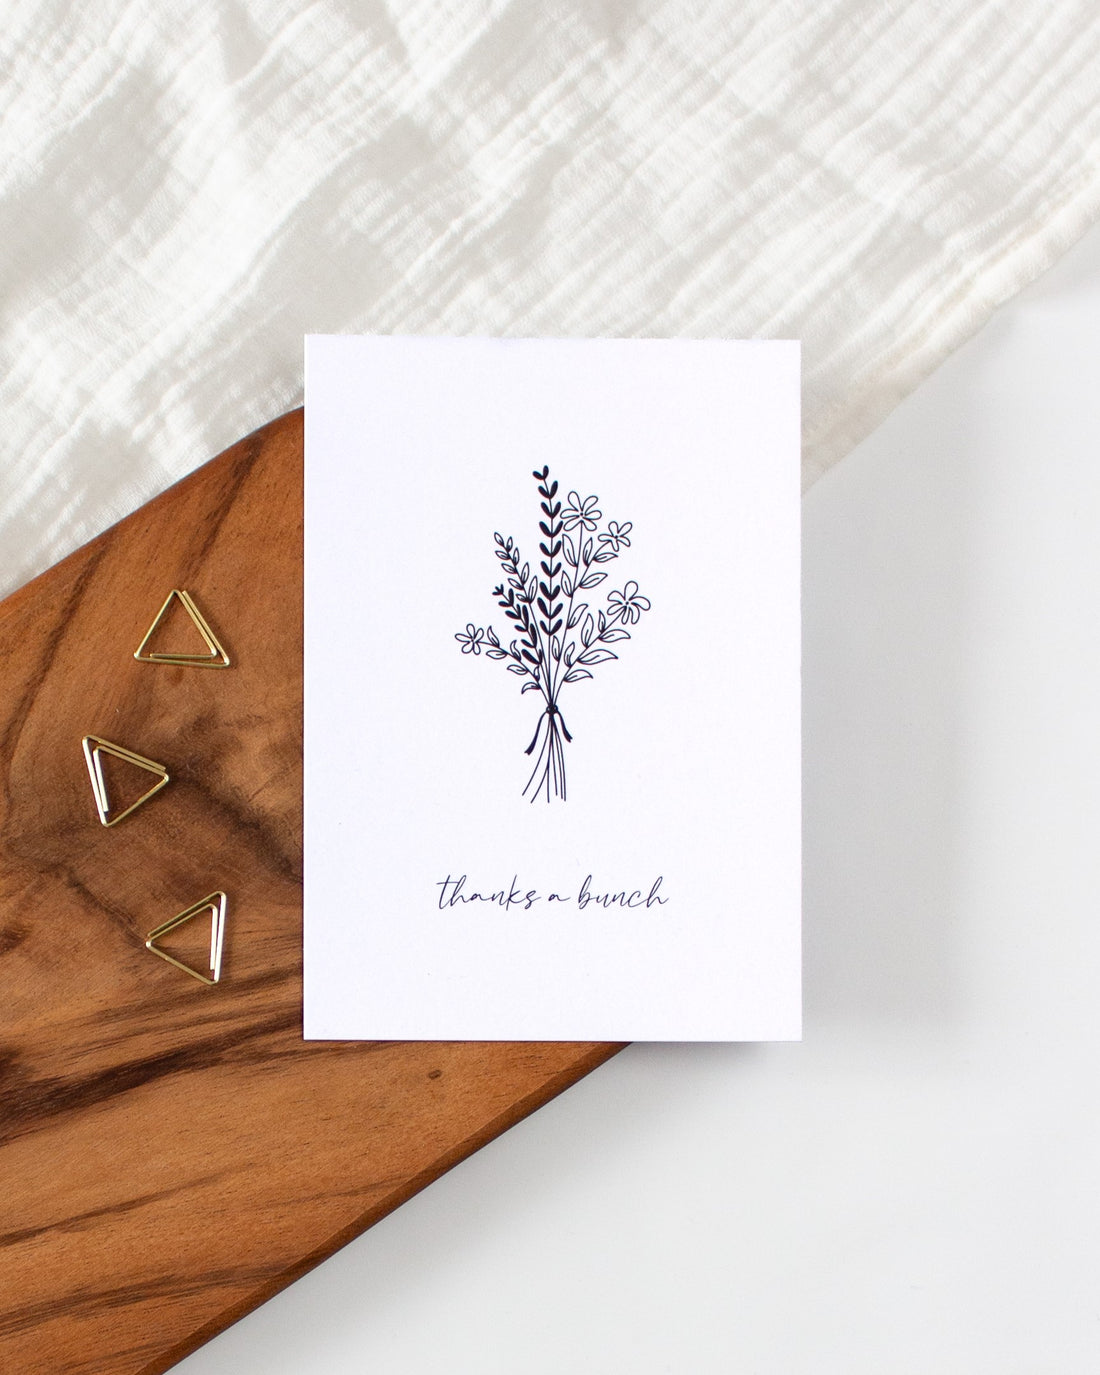 A postcard laying on a wooden board with some golden triangle paperclips and a white cloth in the background. The postcard design shows a line art drawing of a bouquet of some flowers and branches, with a line of cursive writing below, that says &quot;thanks a bunch&quot;.